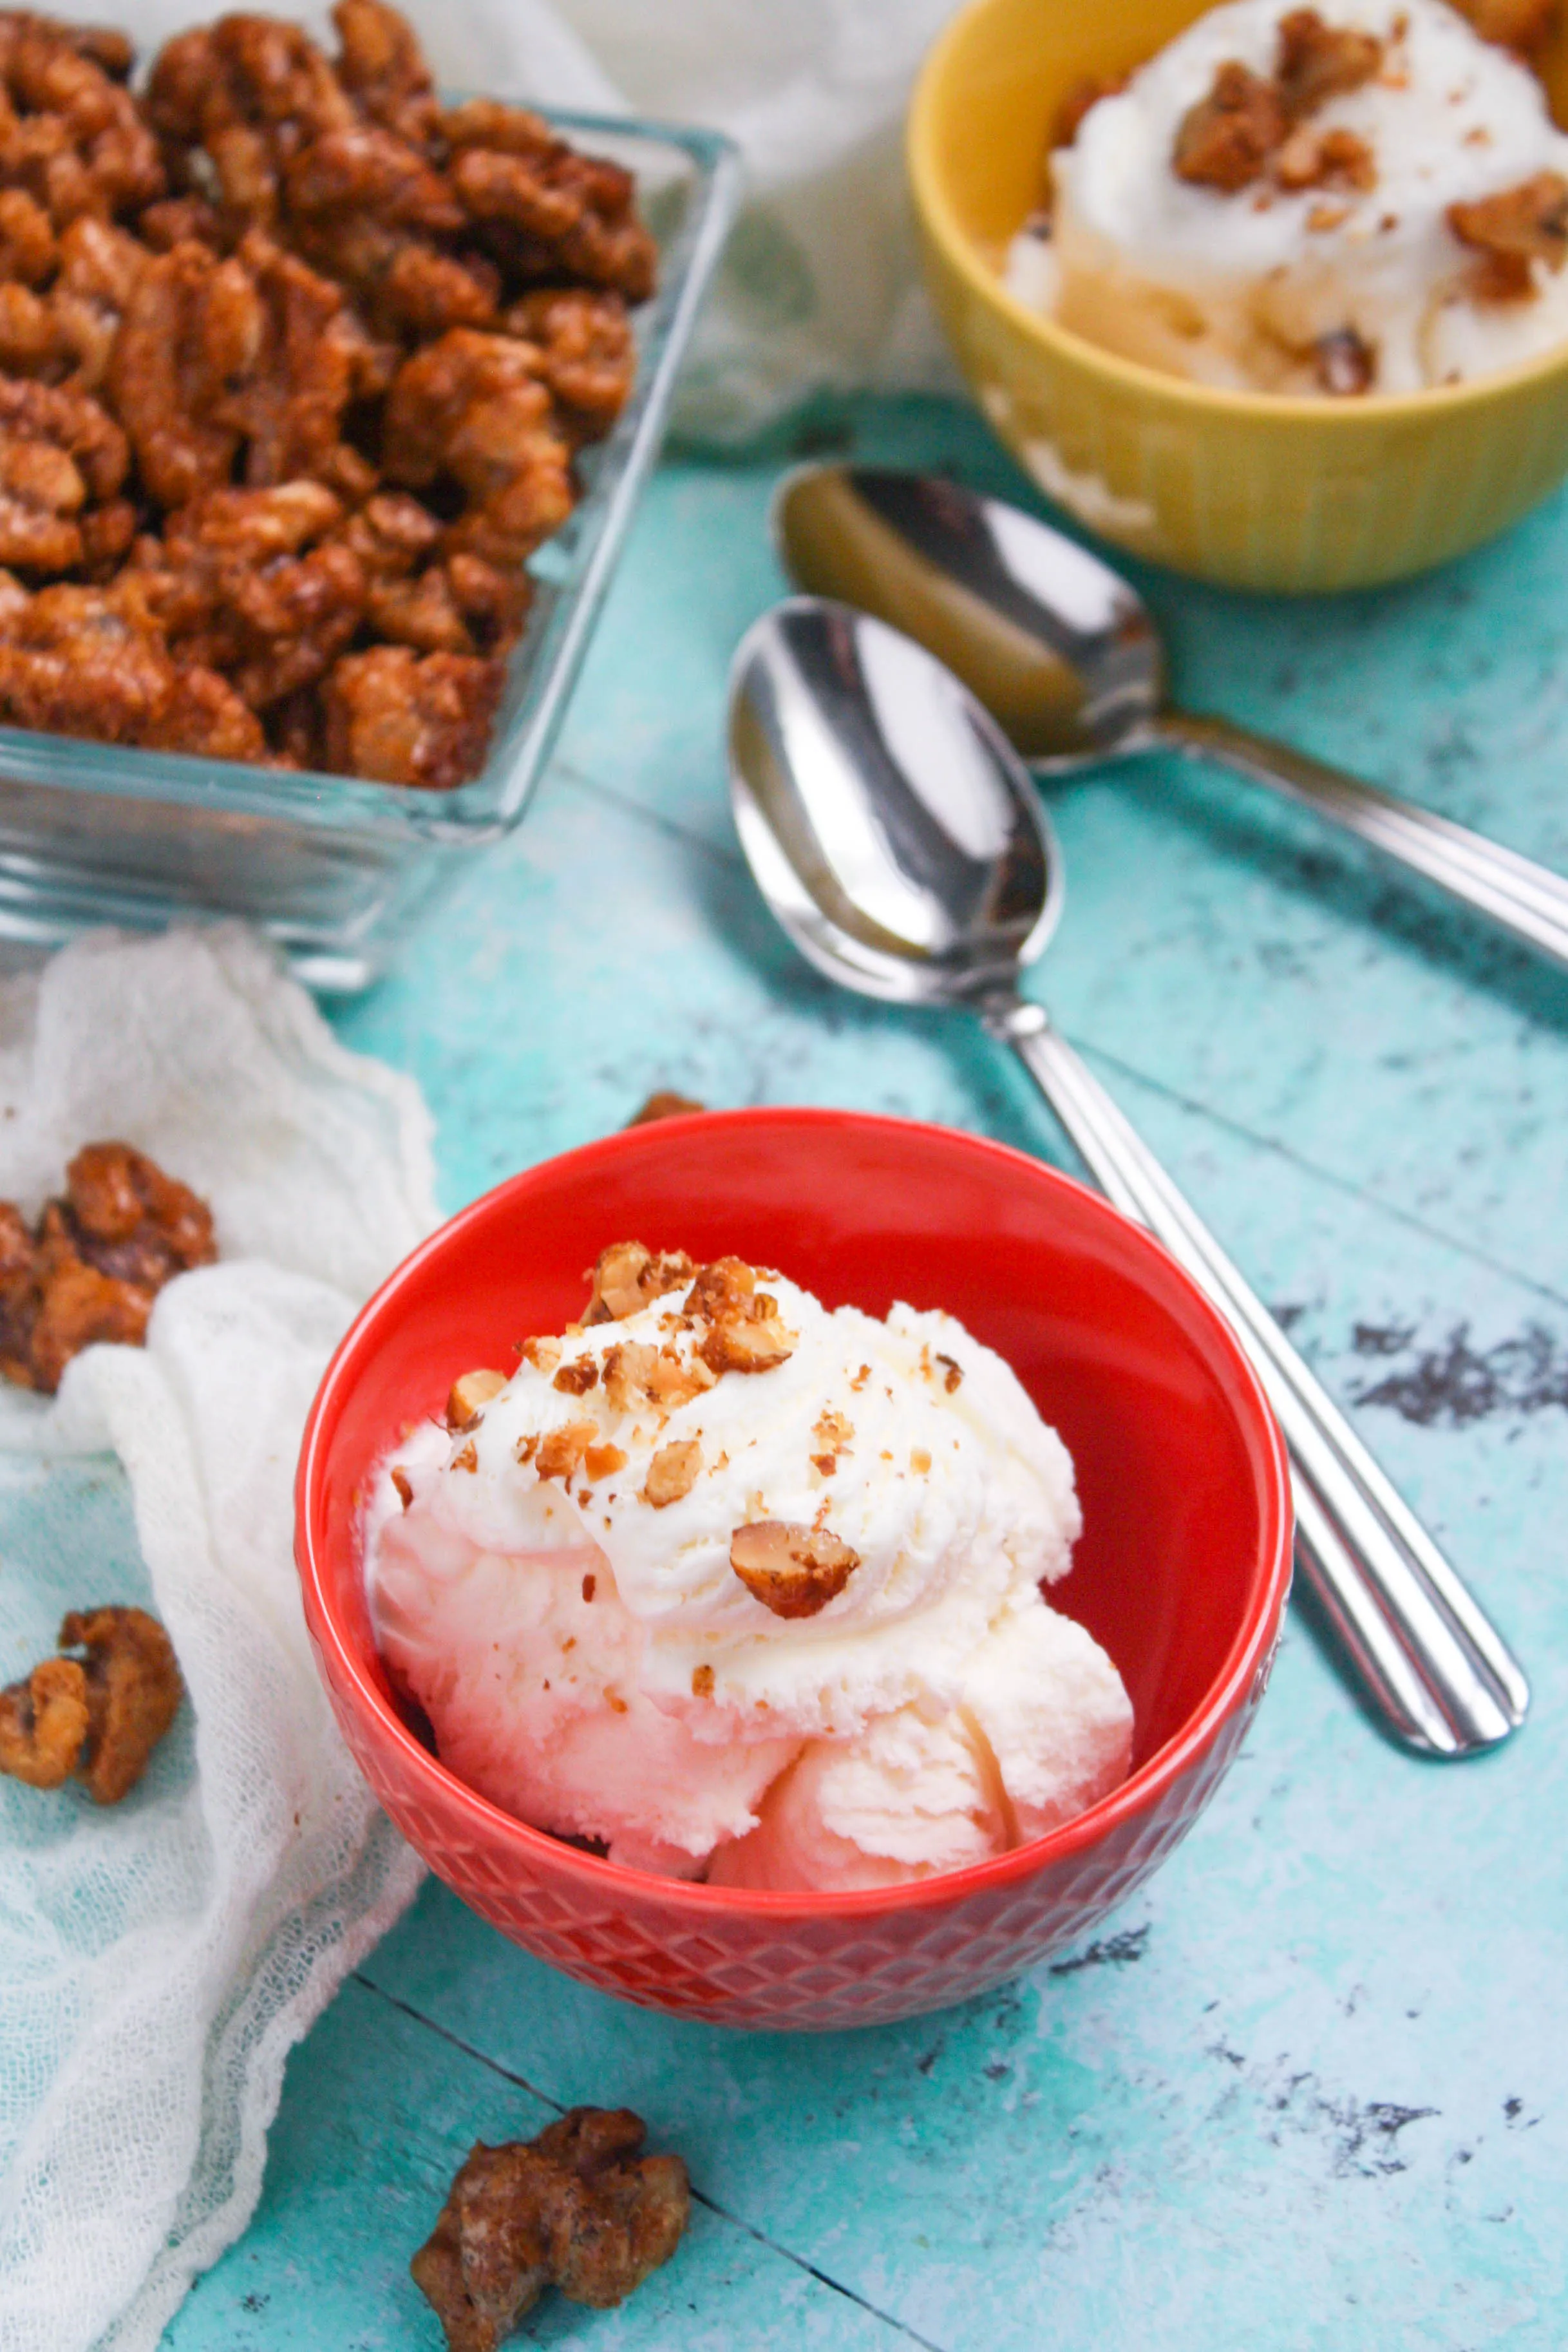 Sweet, Spicy & Smoky Candied Walnuts are tasty on their own, or sprinkled over vanilla ice cream, too! These candied walnuts are versatile, and oh-so tasty!